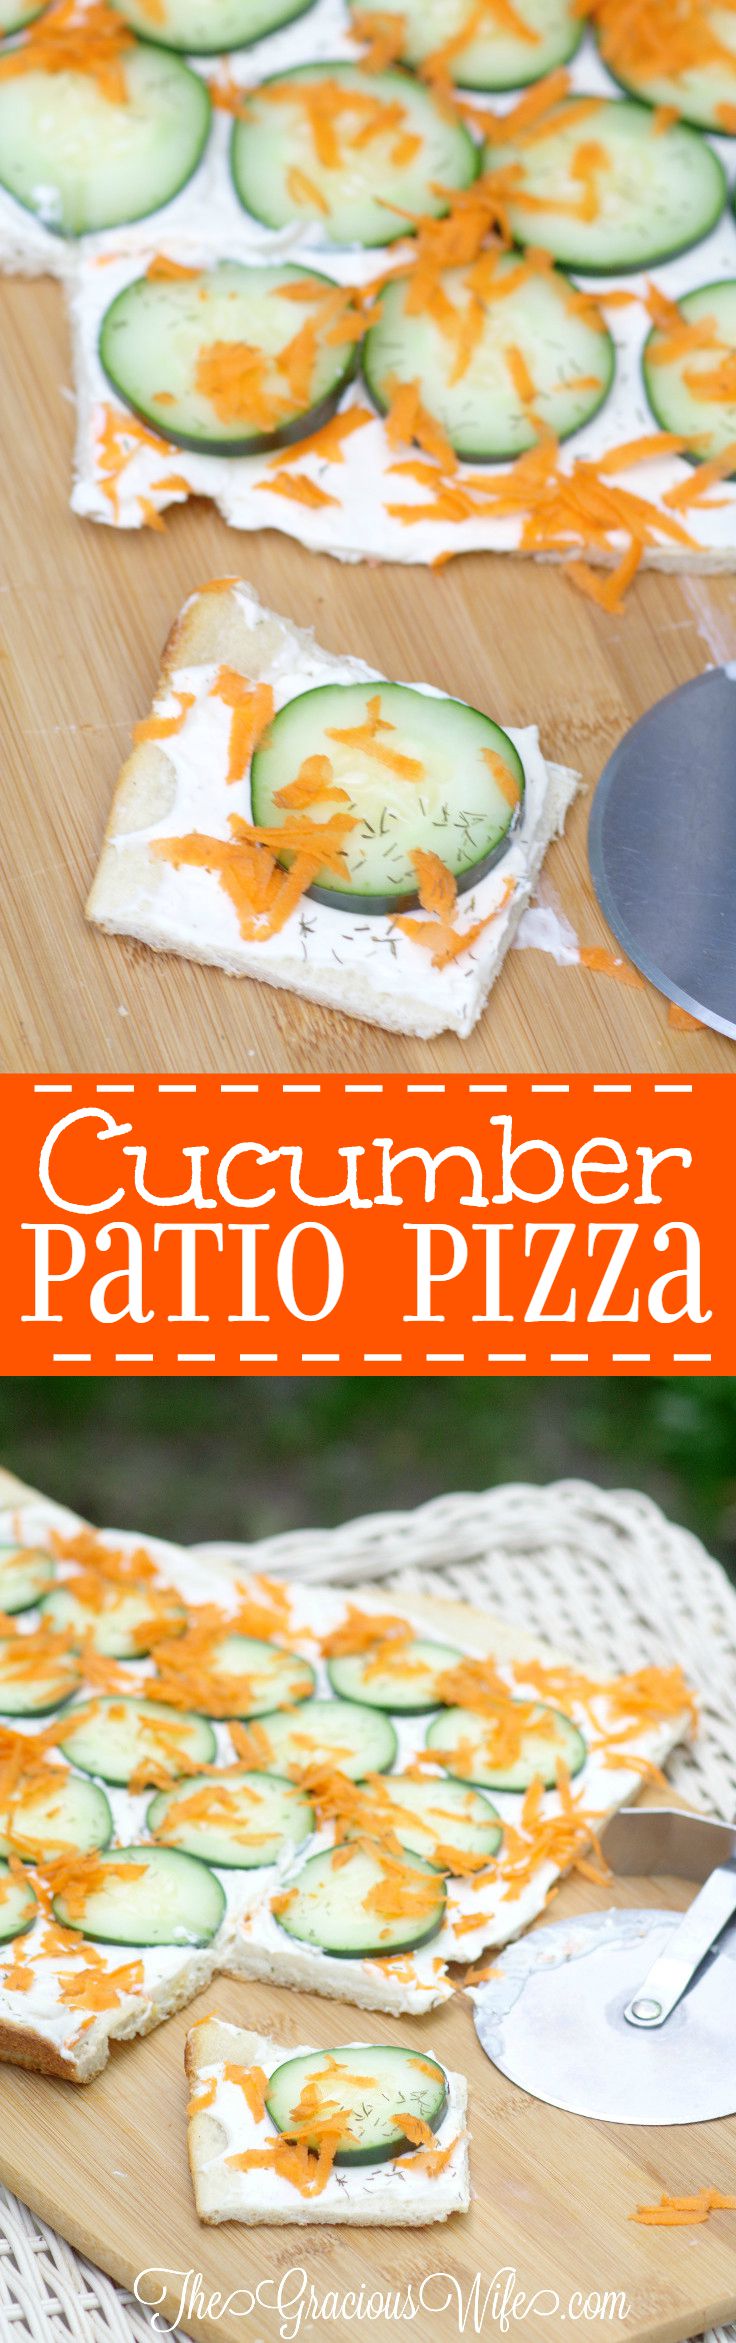 Cucumber Patio Pizza Recipe - creamy, delicious cucumber recipes that's great for an appetizer recipe or a snack recipe! My kids love this! Awesome way to get them to eat some extra veggies! 